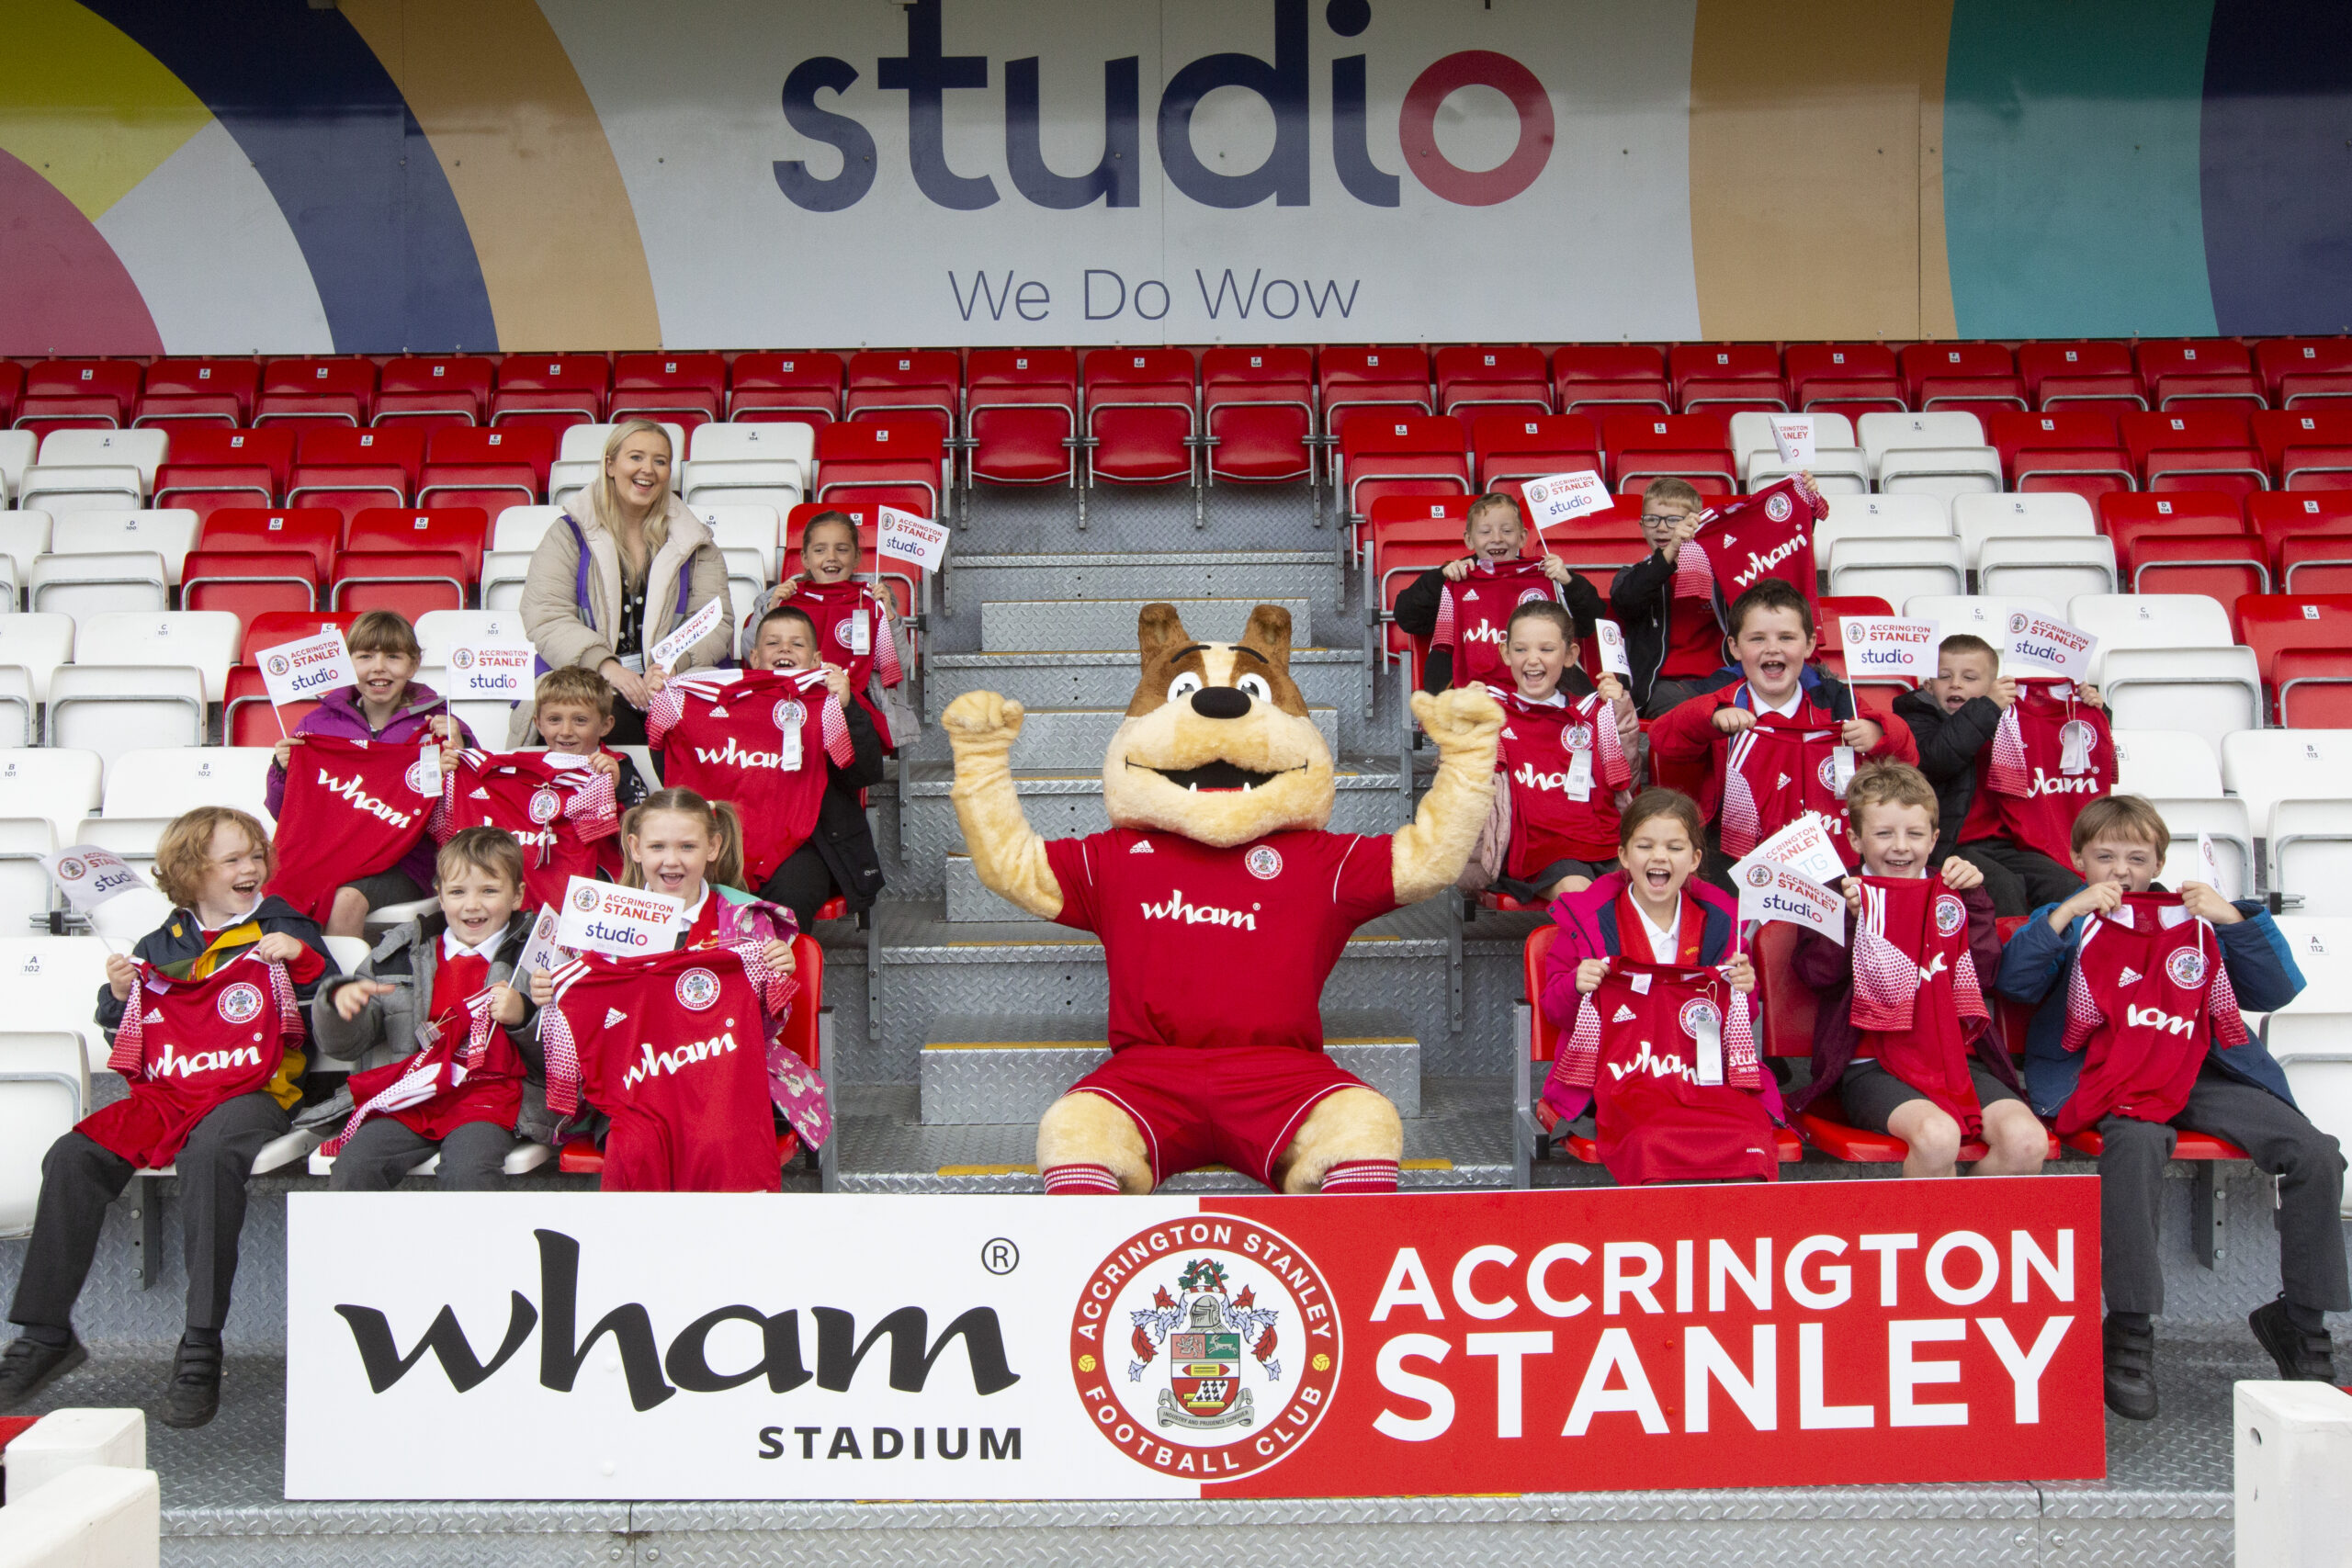 2022 sees the sixth annual Year Three Official Accrington Stanley Shirt Giveaway